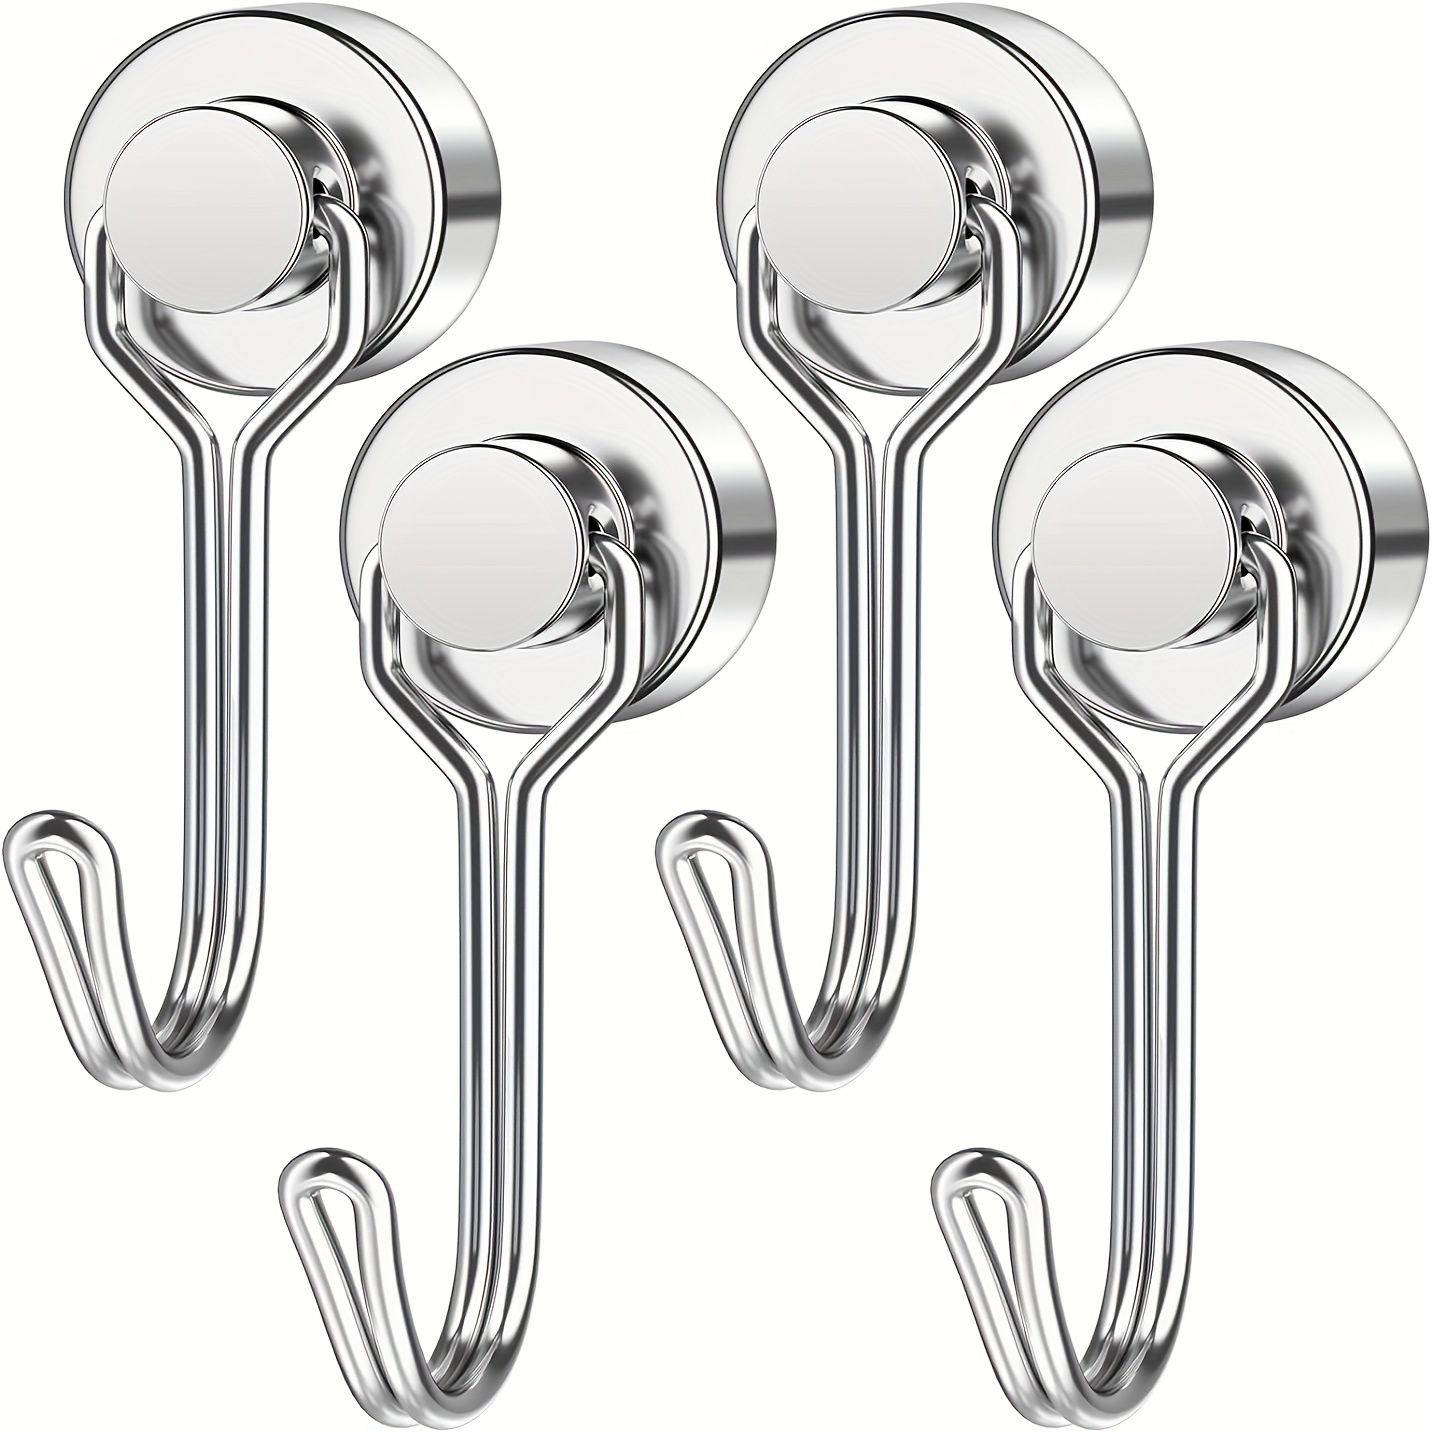 

4 Pack Heavy Duty Metal Magnetic Hooks - 30lbs Swivel Neodymium Ceiling Mount With Polished Finish, Foldable & Easy Install For Refrigerator, Kitchen, Office, Garage, Cruise Ship